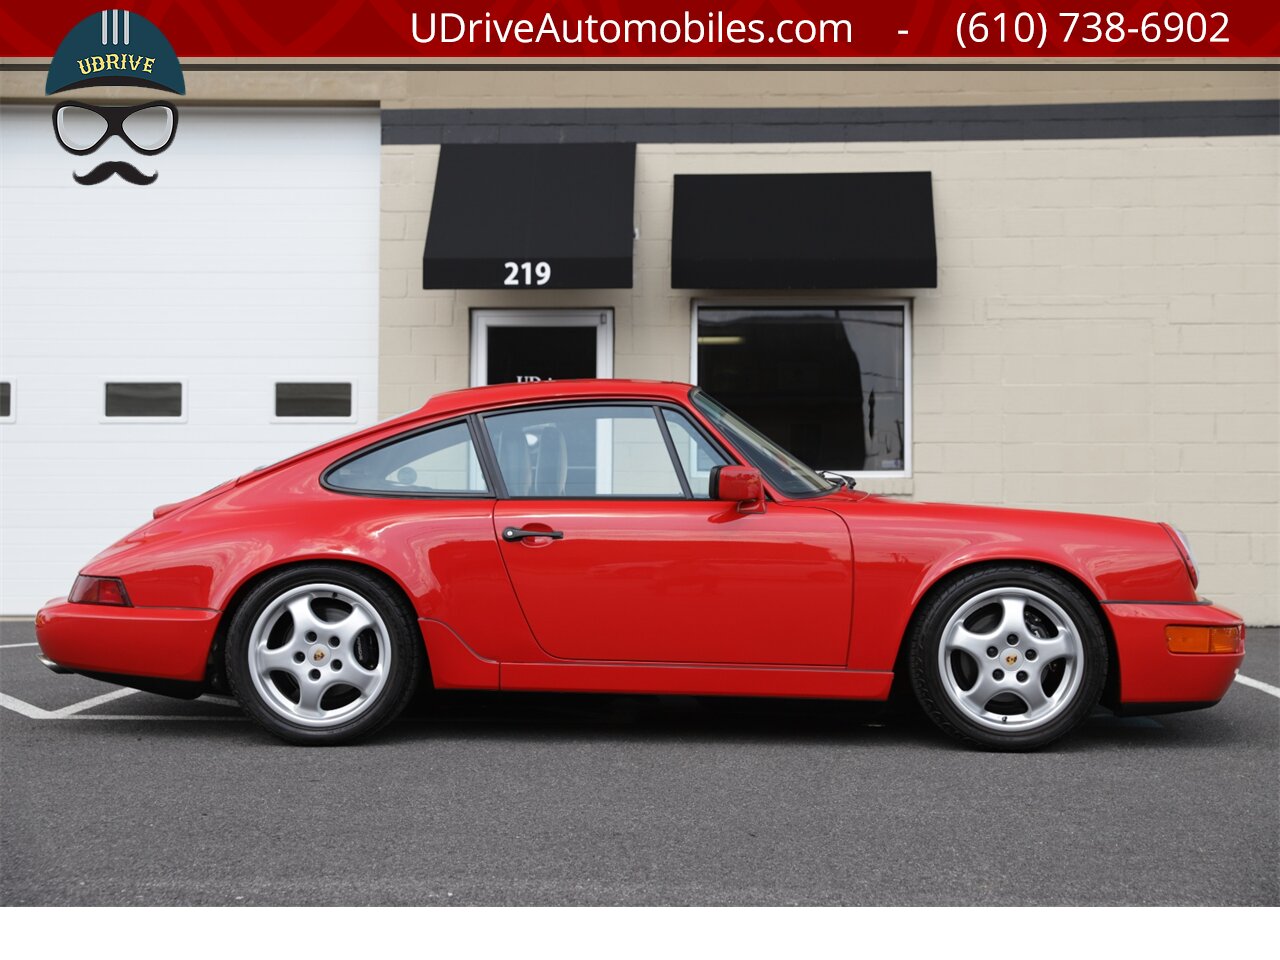 1989 Porsche 911 Carrera 4 964 C4 5 Speed Engine Rebuild  $40k in Service History Cup 1 Wheels - Photo 13 - West Chester, PA 19382